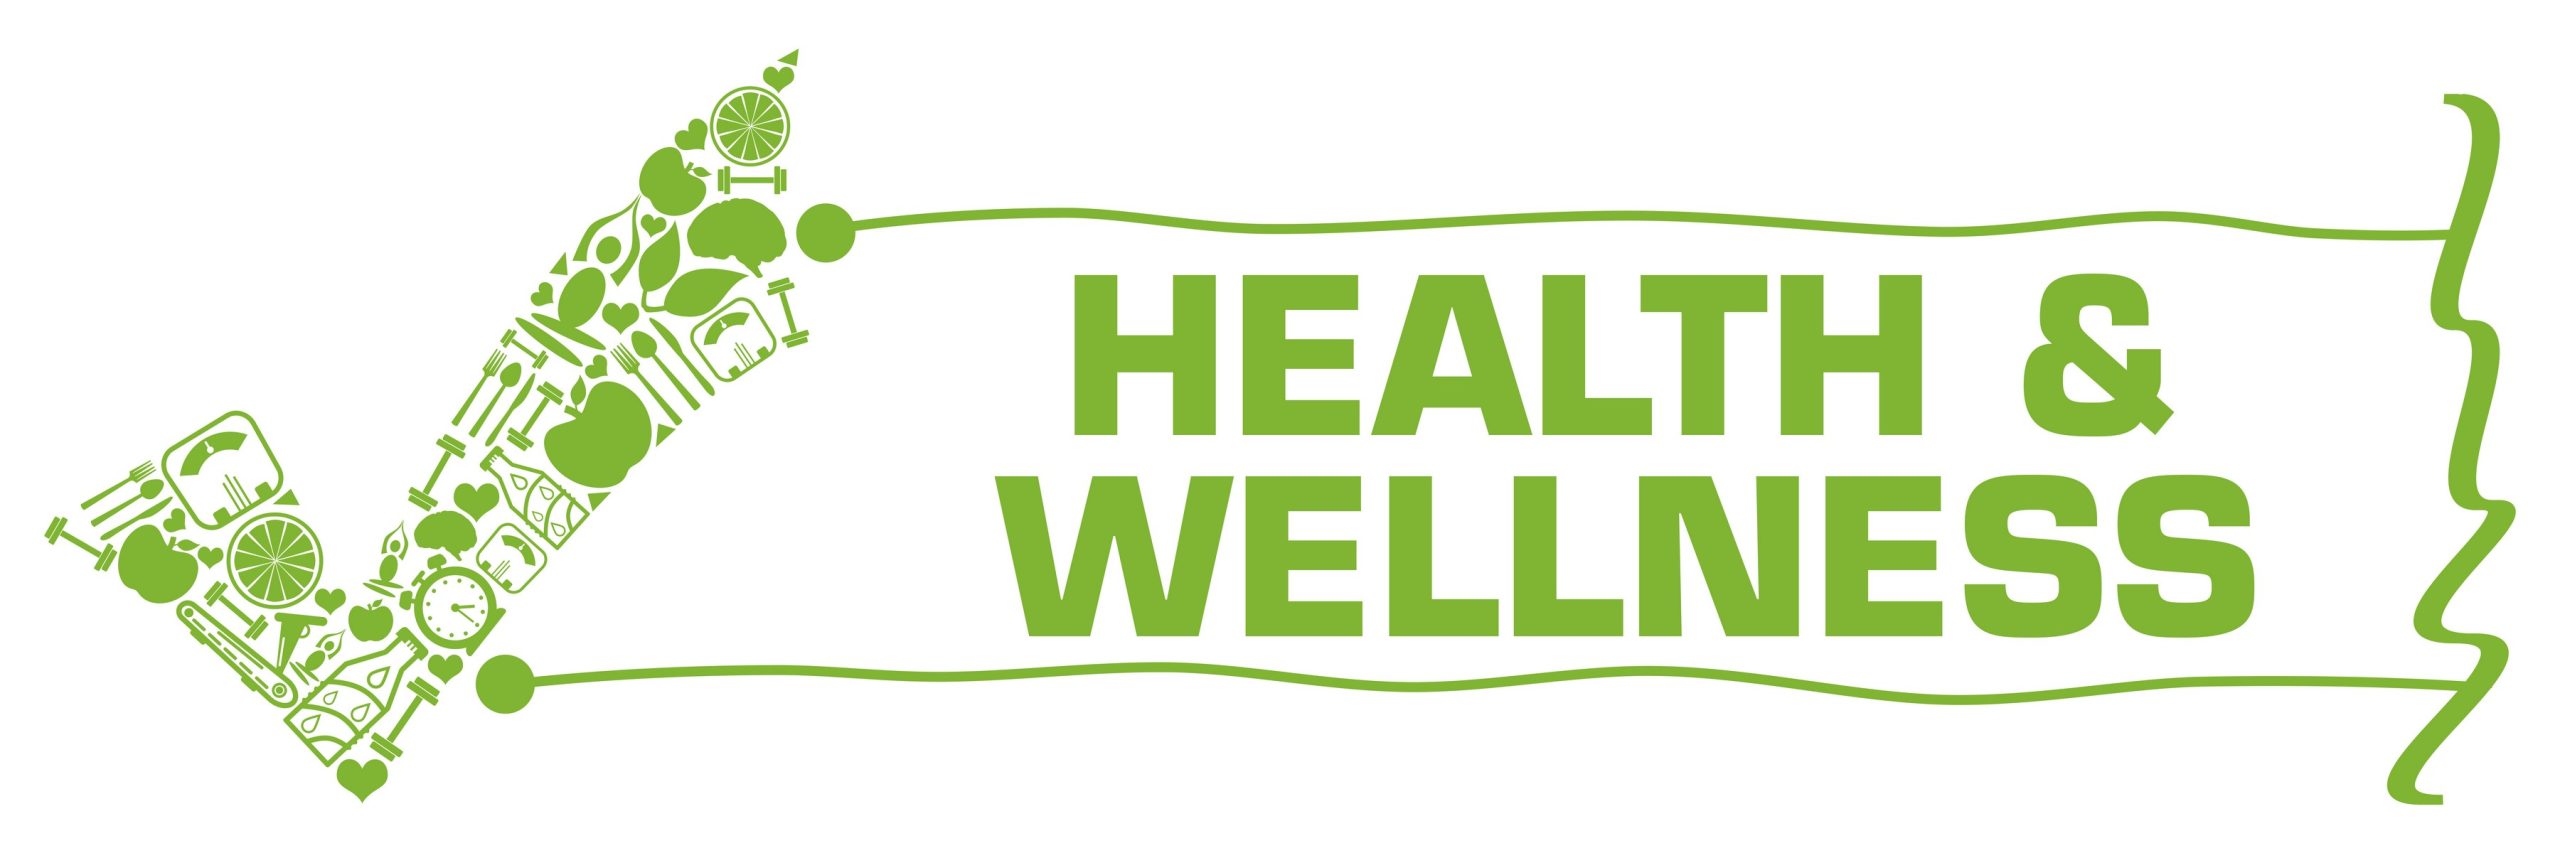 Healthy Vending Seattle | Tacoma Workplace Wellness | Puget Sound Healthy Employees